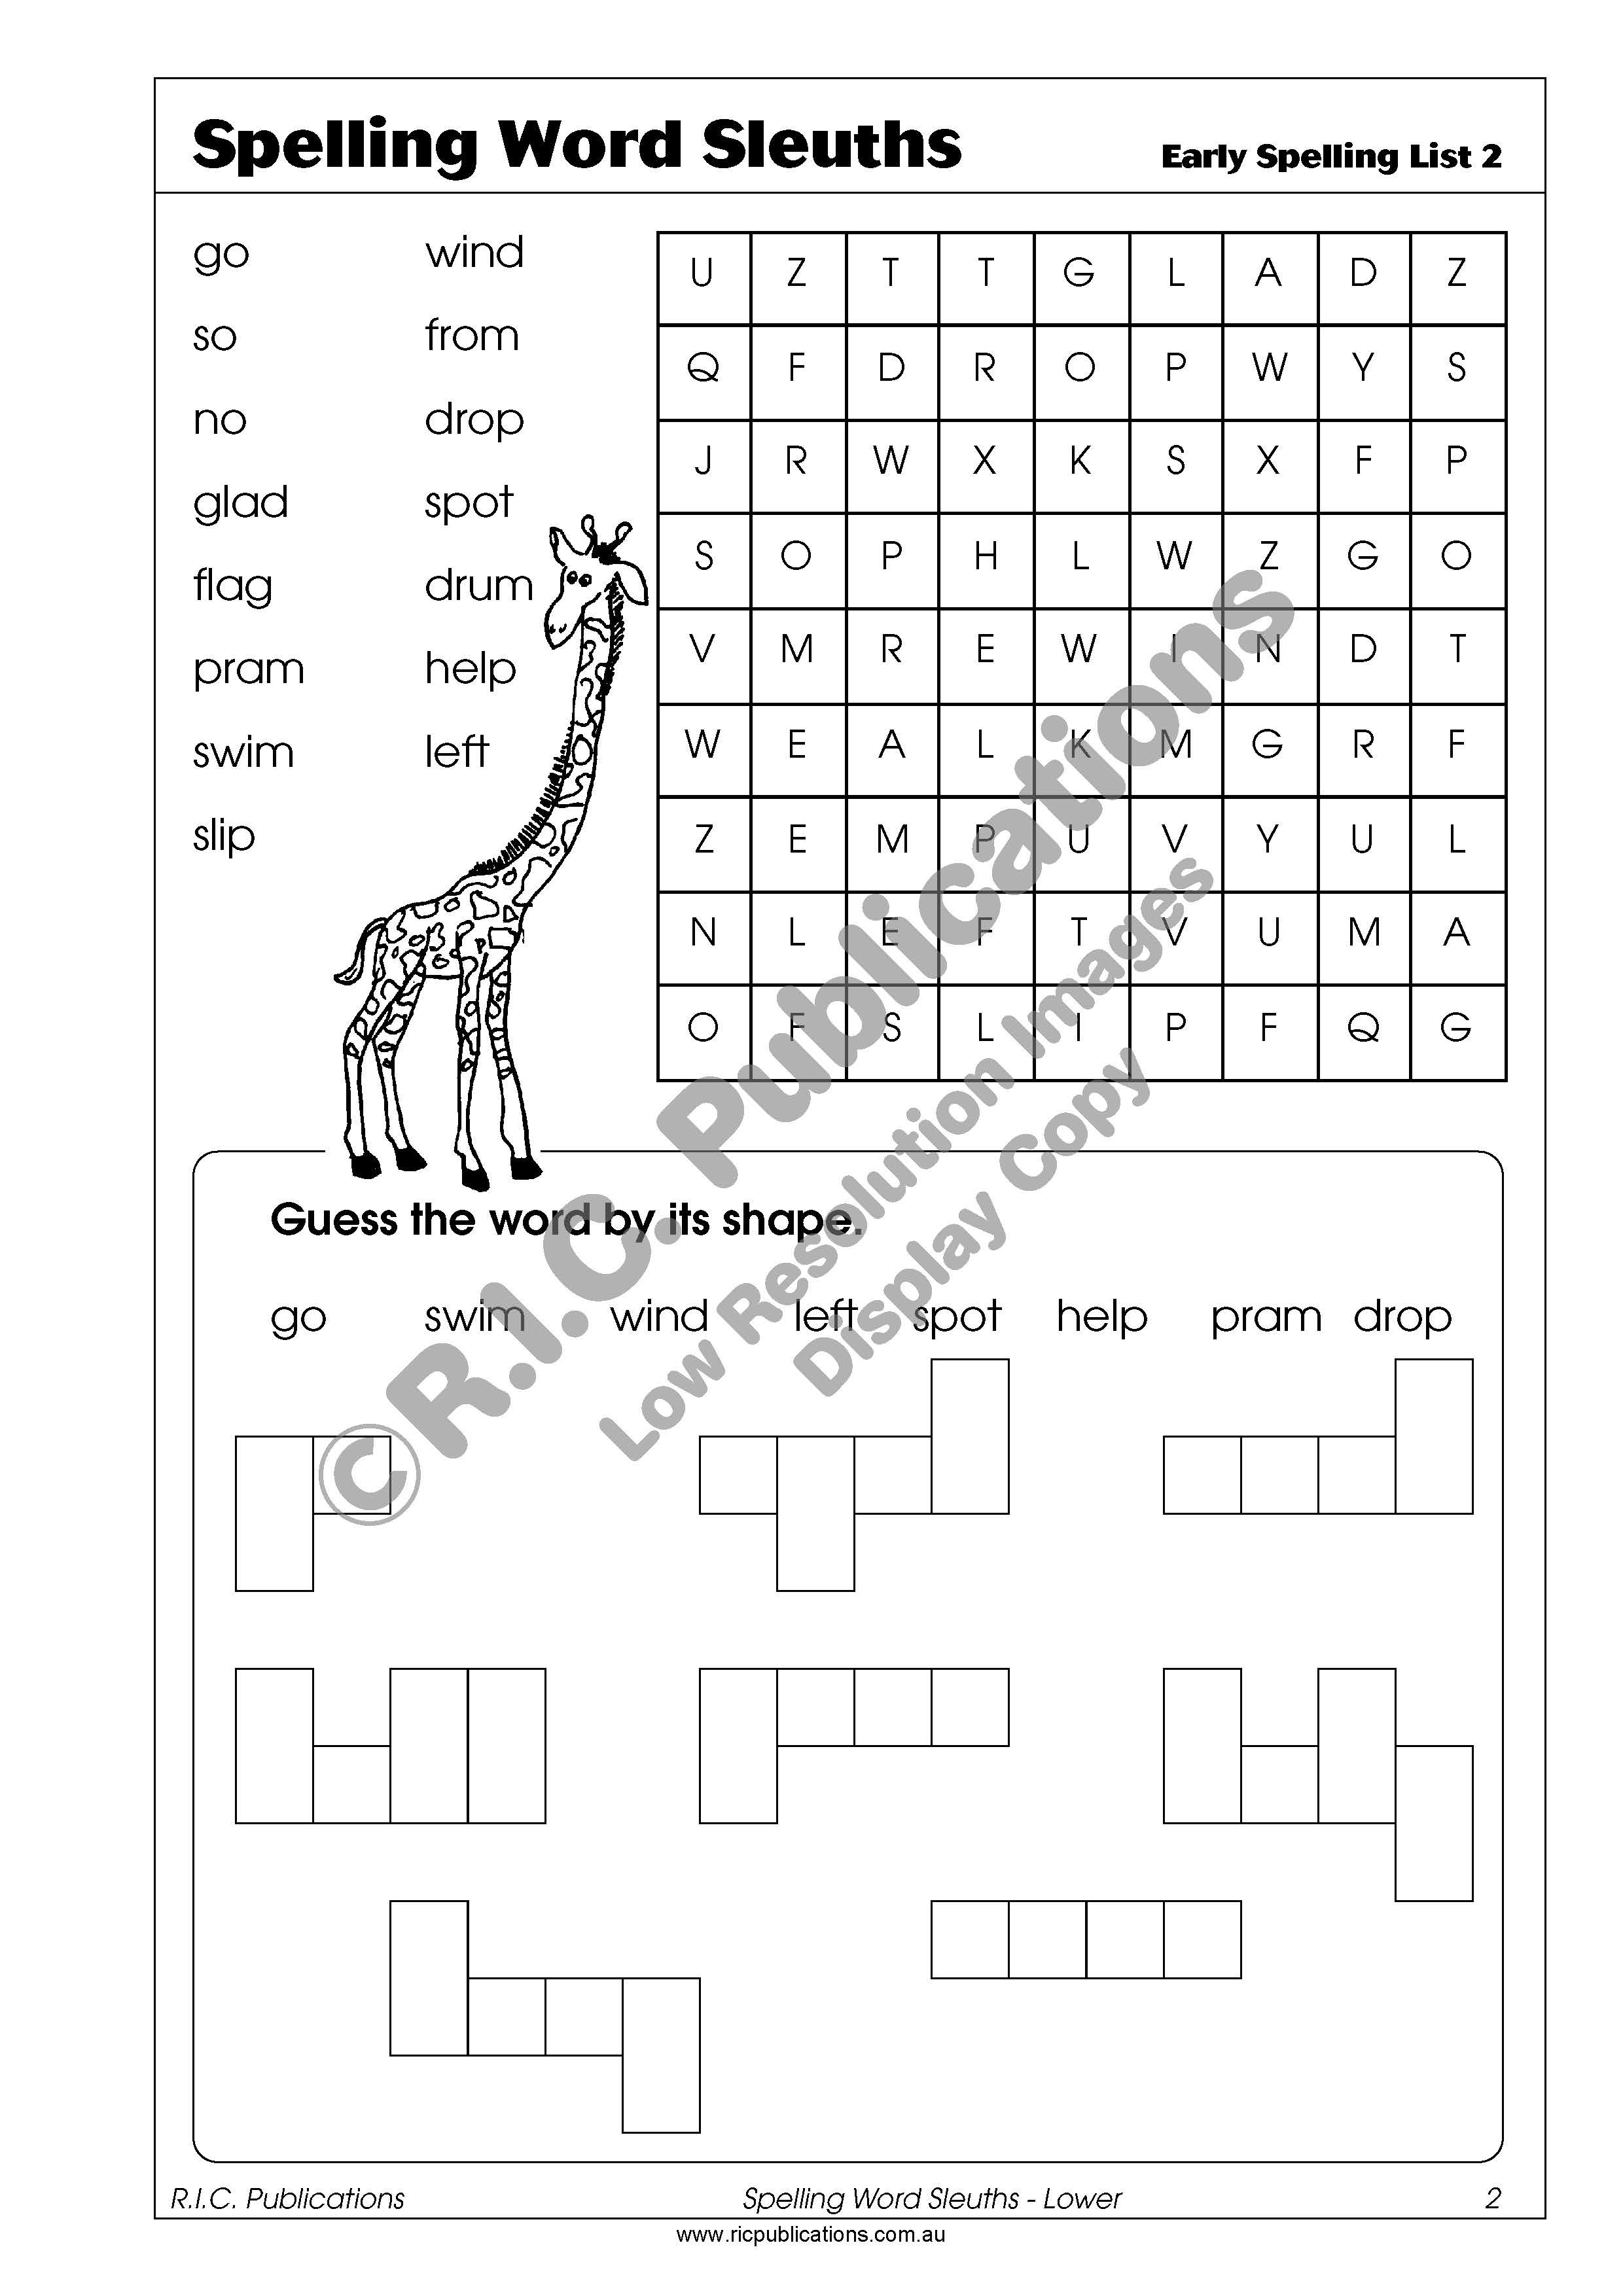 Phonics and Spelling Free Resources | English Resources | RIC Publications Australia